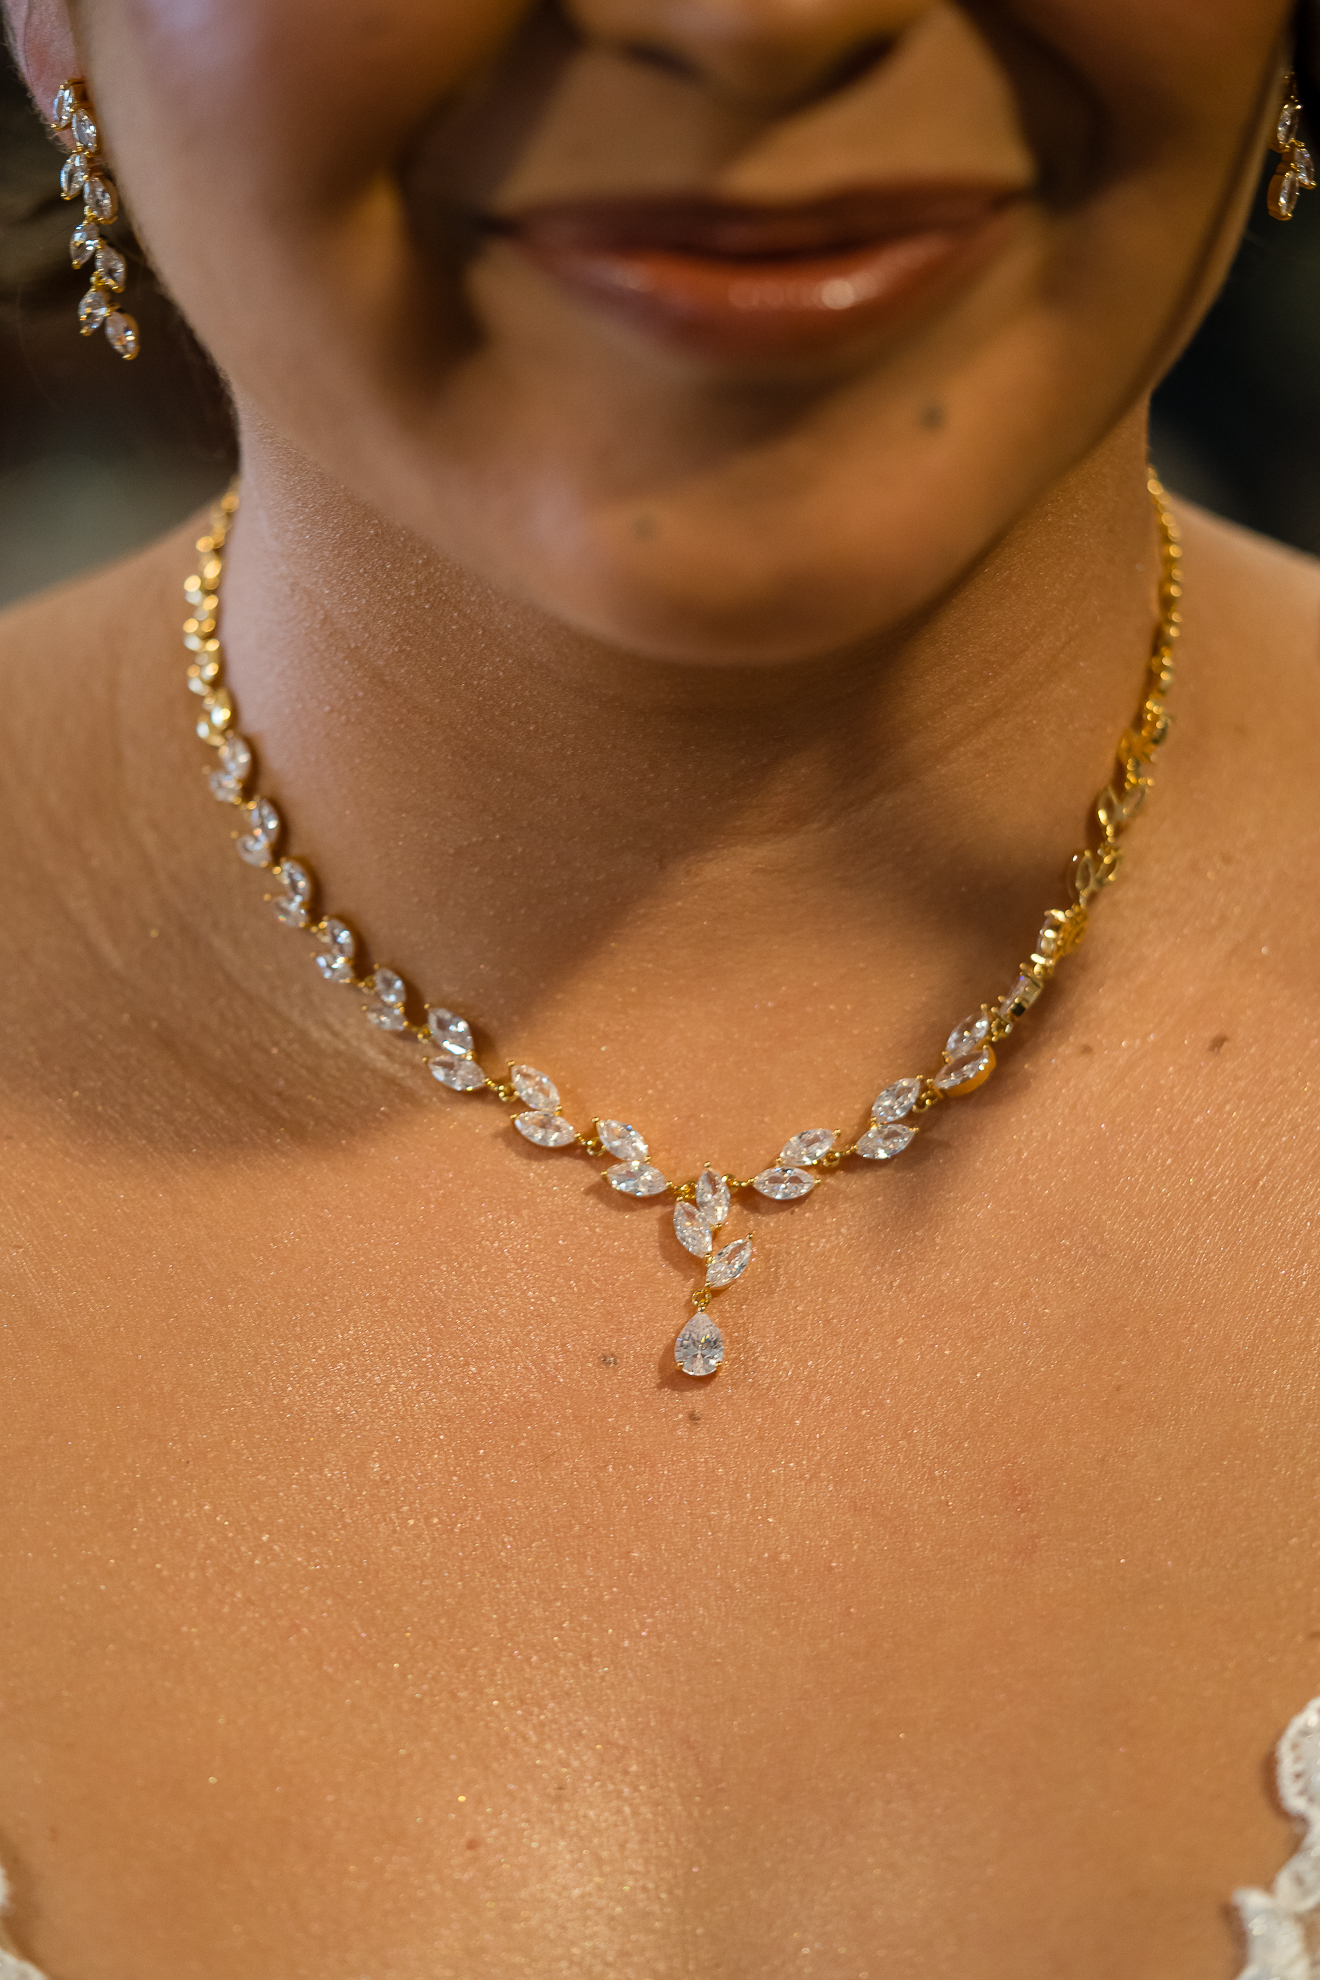 ThomasKim_photography A bride wearing a necklace with diamonds and pearls (S & A).